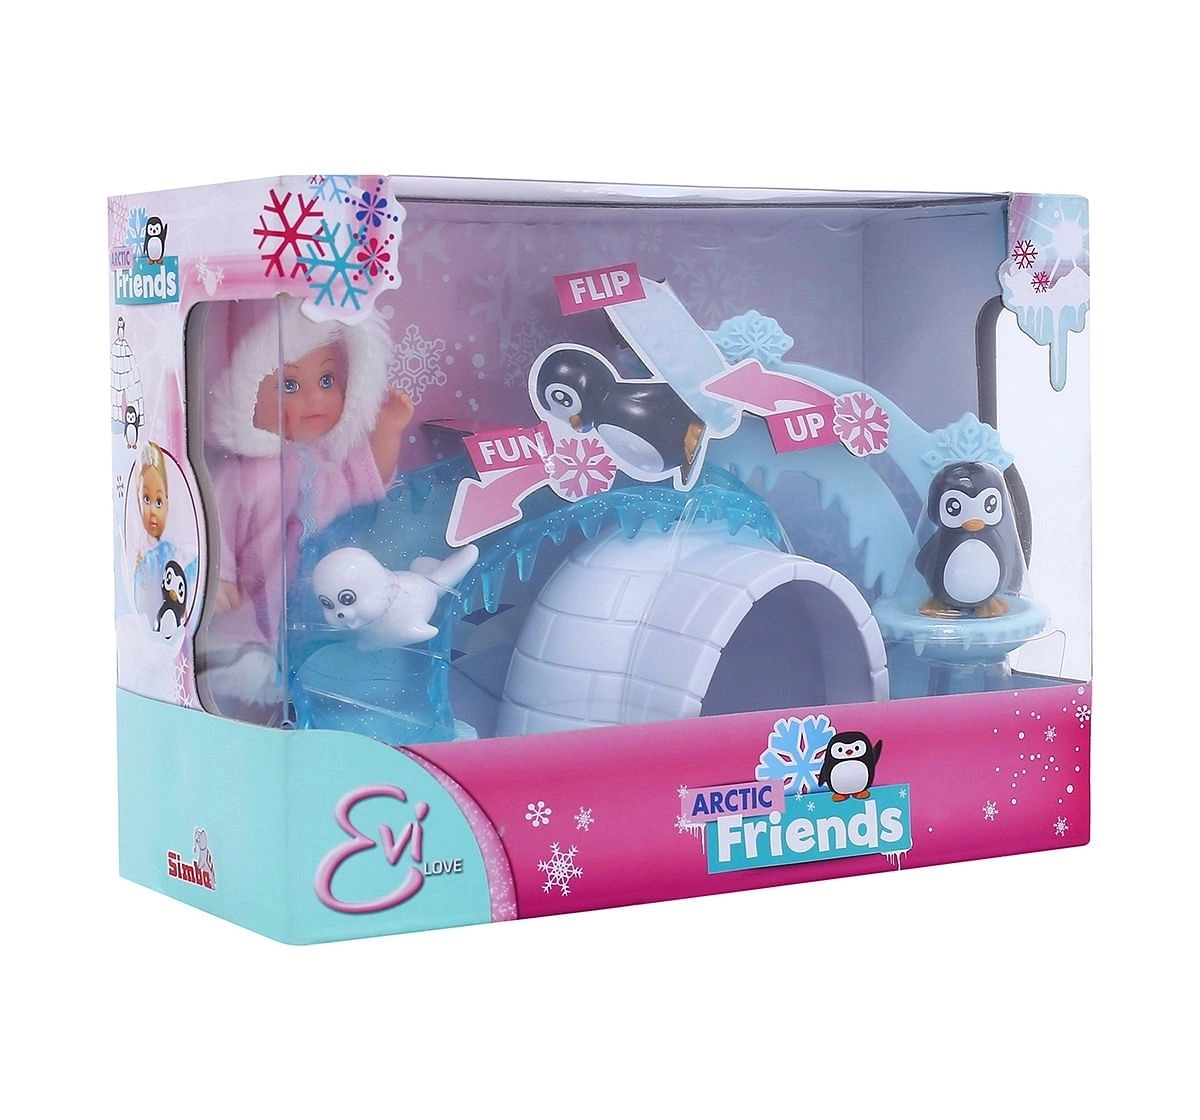  Simba Evi Love Arctic Friends, Multi Color Dolls & Accessories for age 3Y+ 